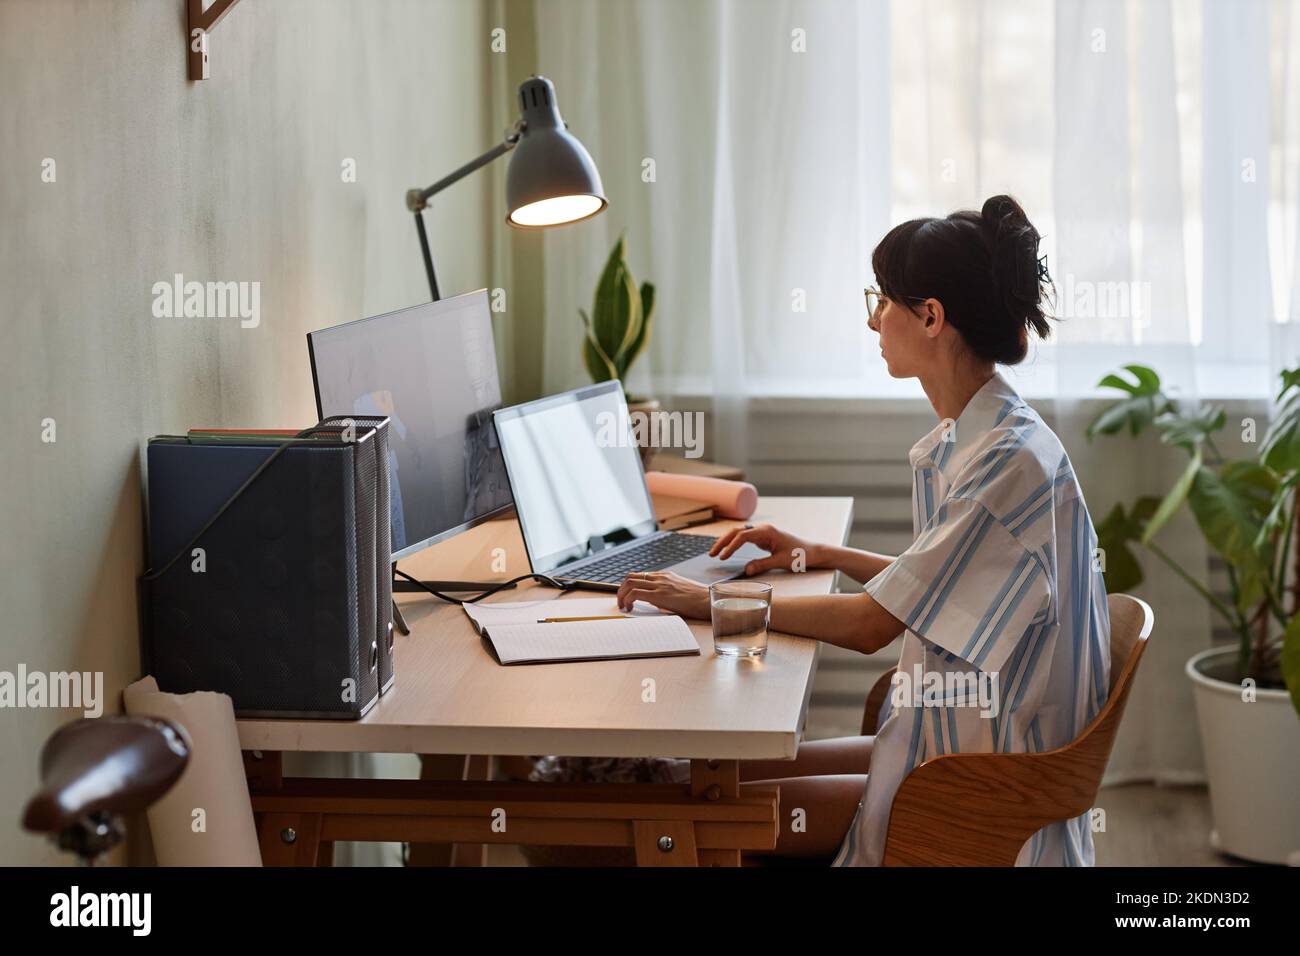 Side view portrait of young woman using laptop while working or studying at cozy home office workplace with dim lights Stock Photo